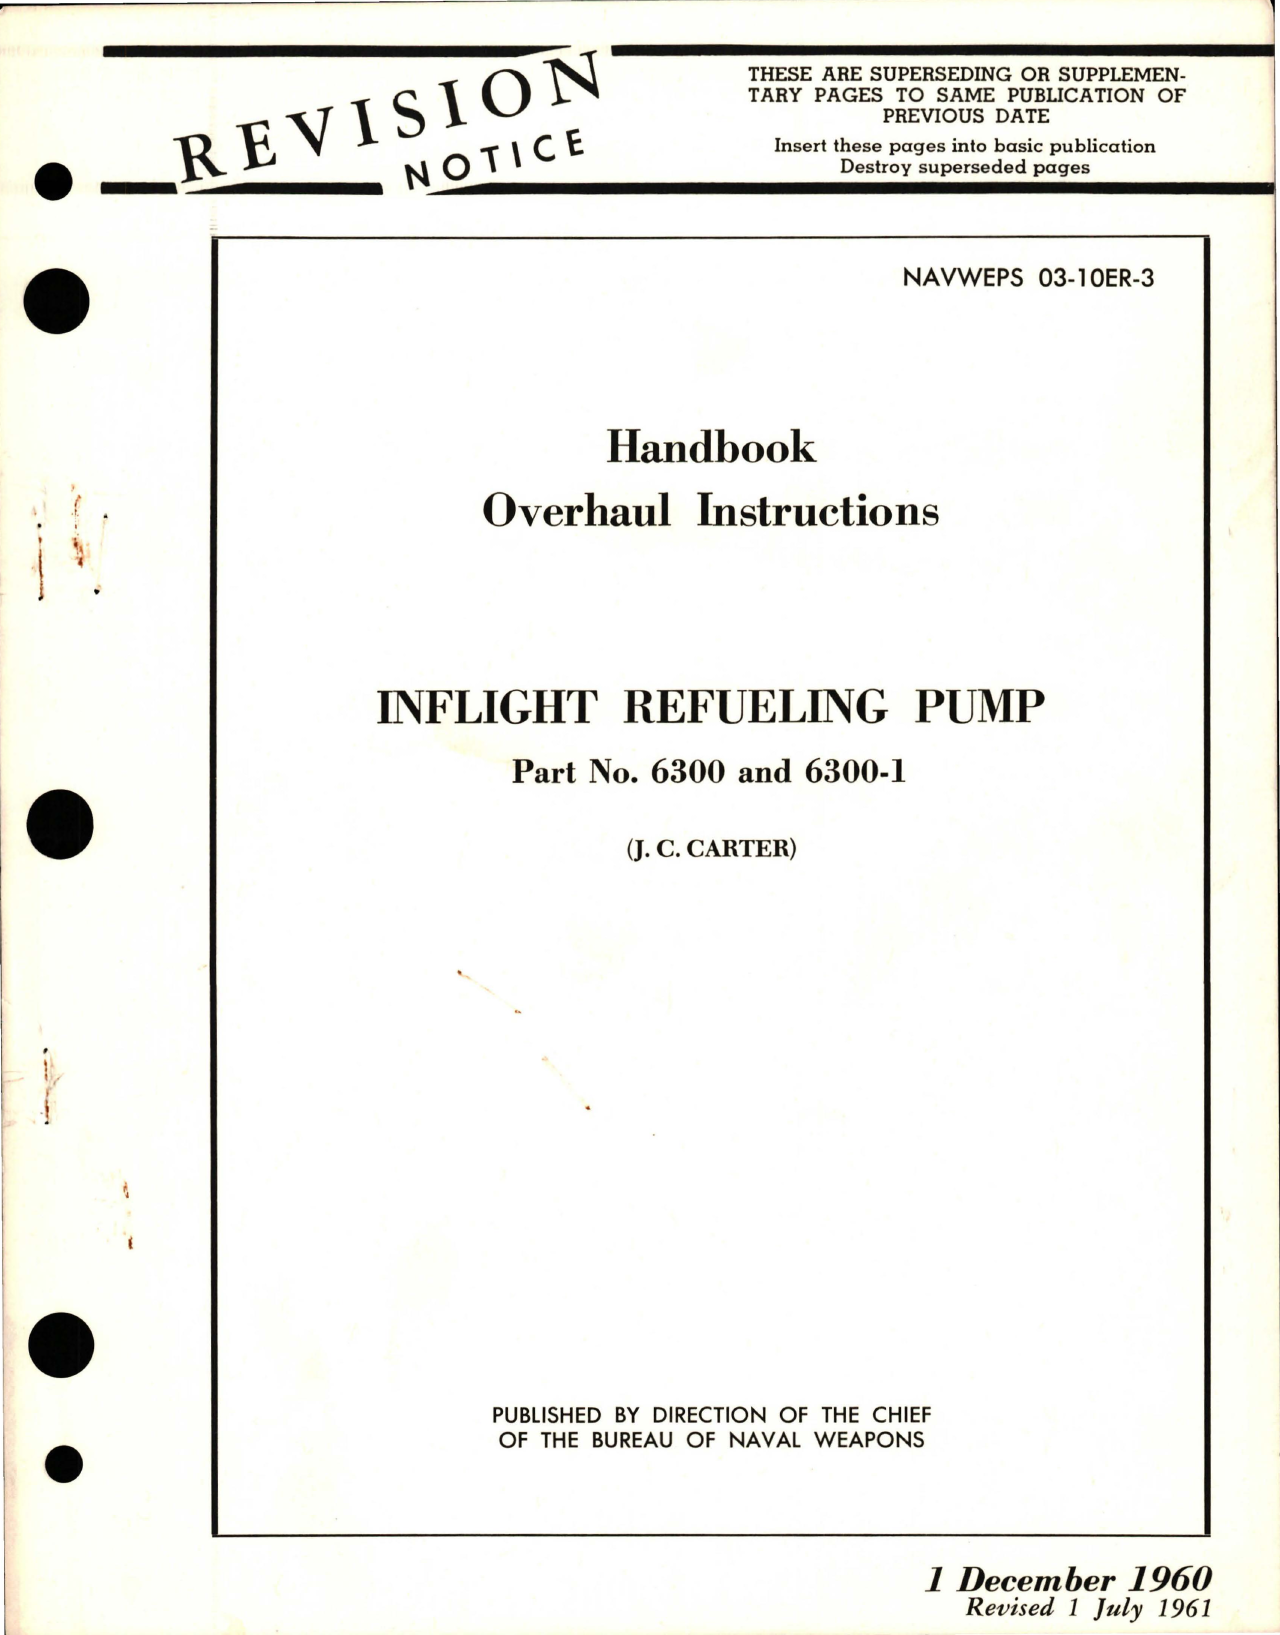 Sample page 1 from AirCorps Library document: Overhaul Instructions for Inflight Refueling Pump - Part 6300 and 6300-1